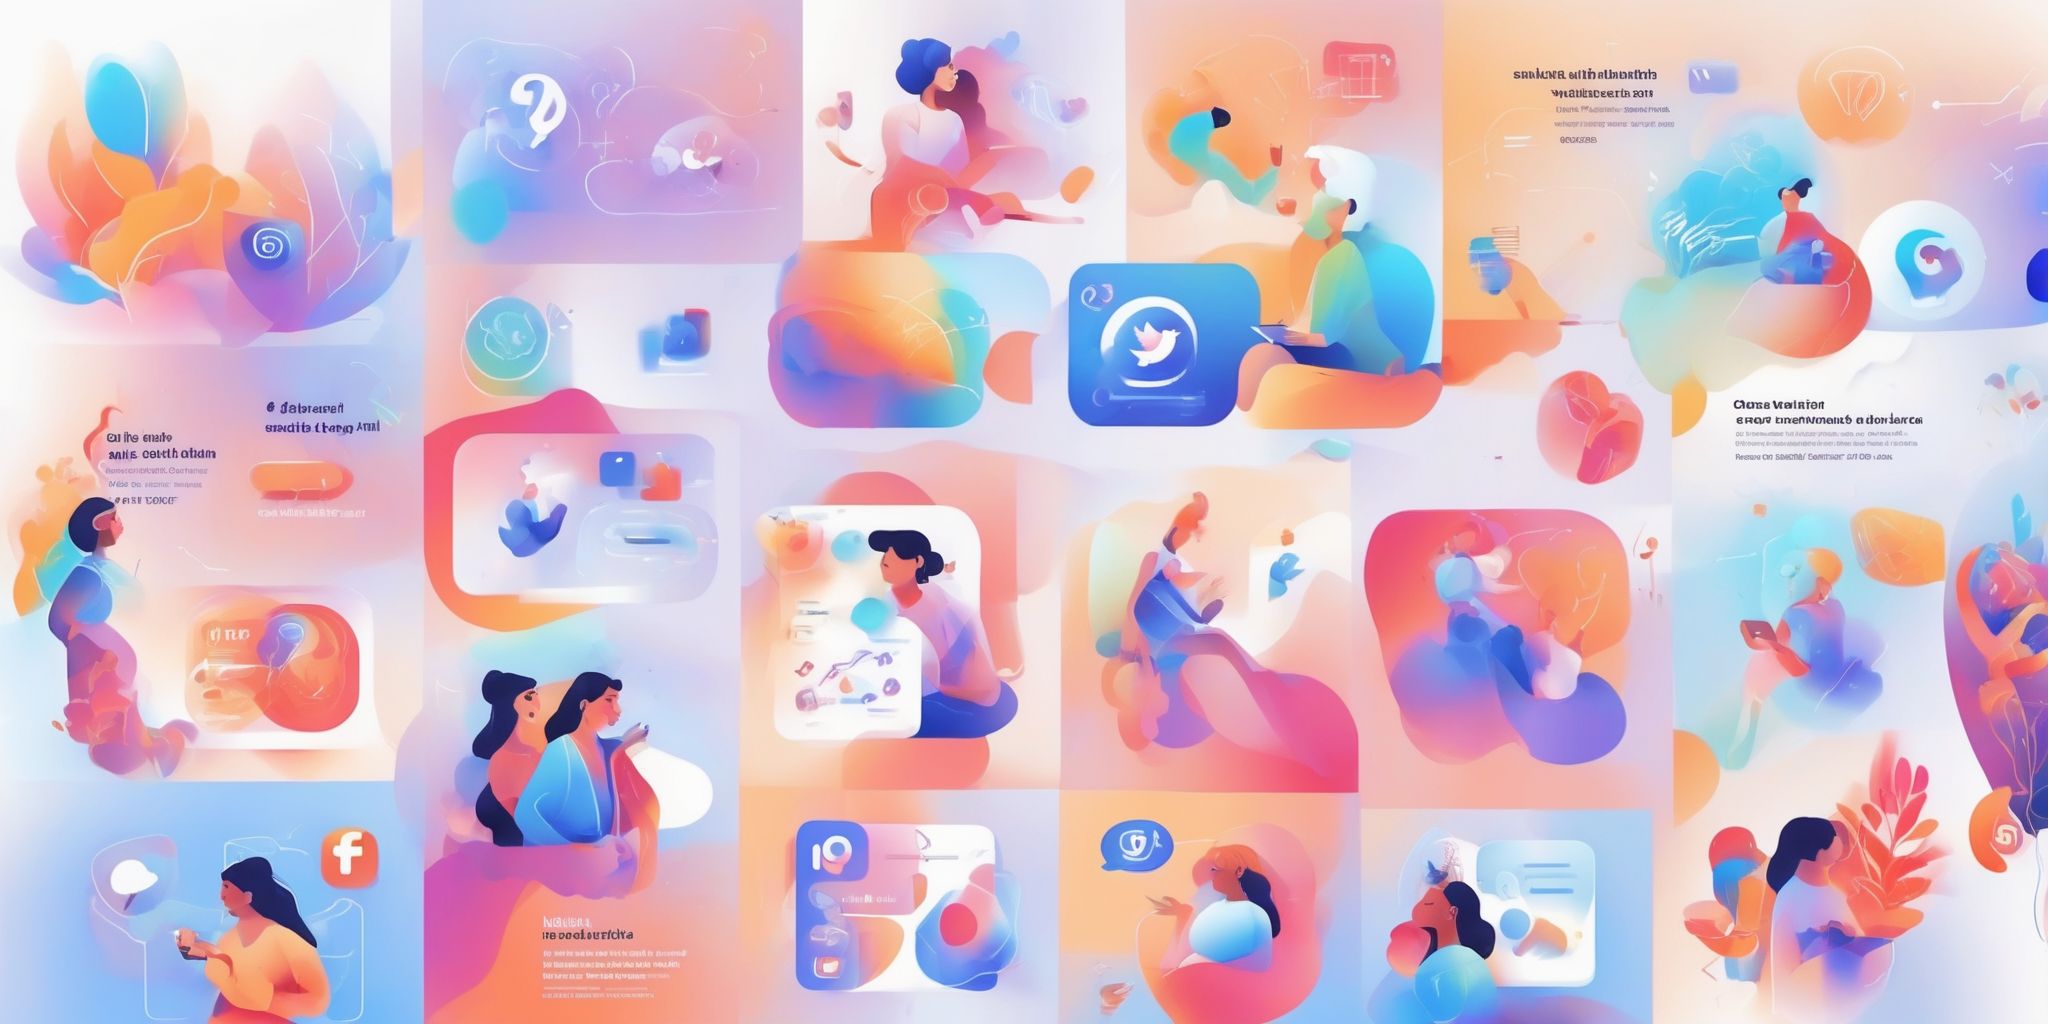 Social media trends in illustration style with gradients and white background